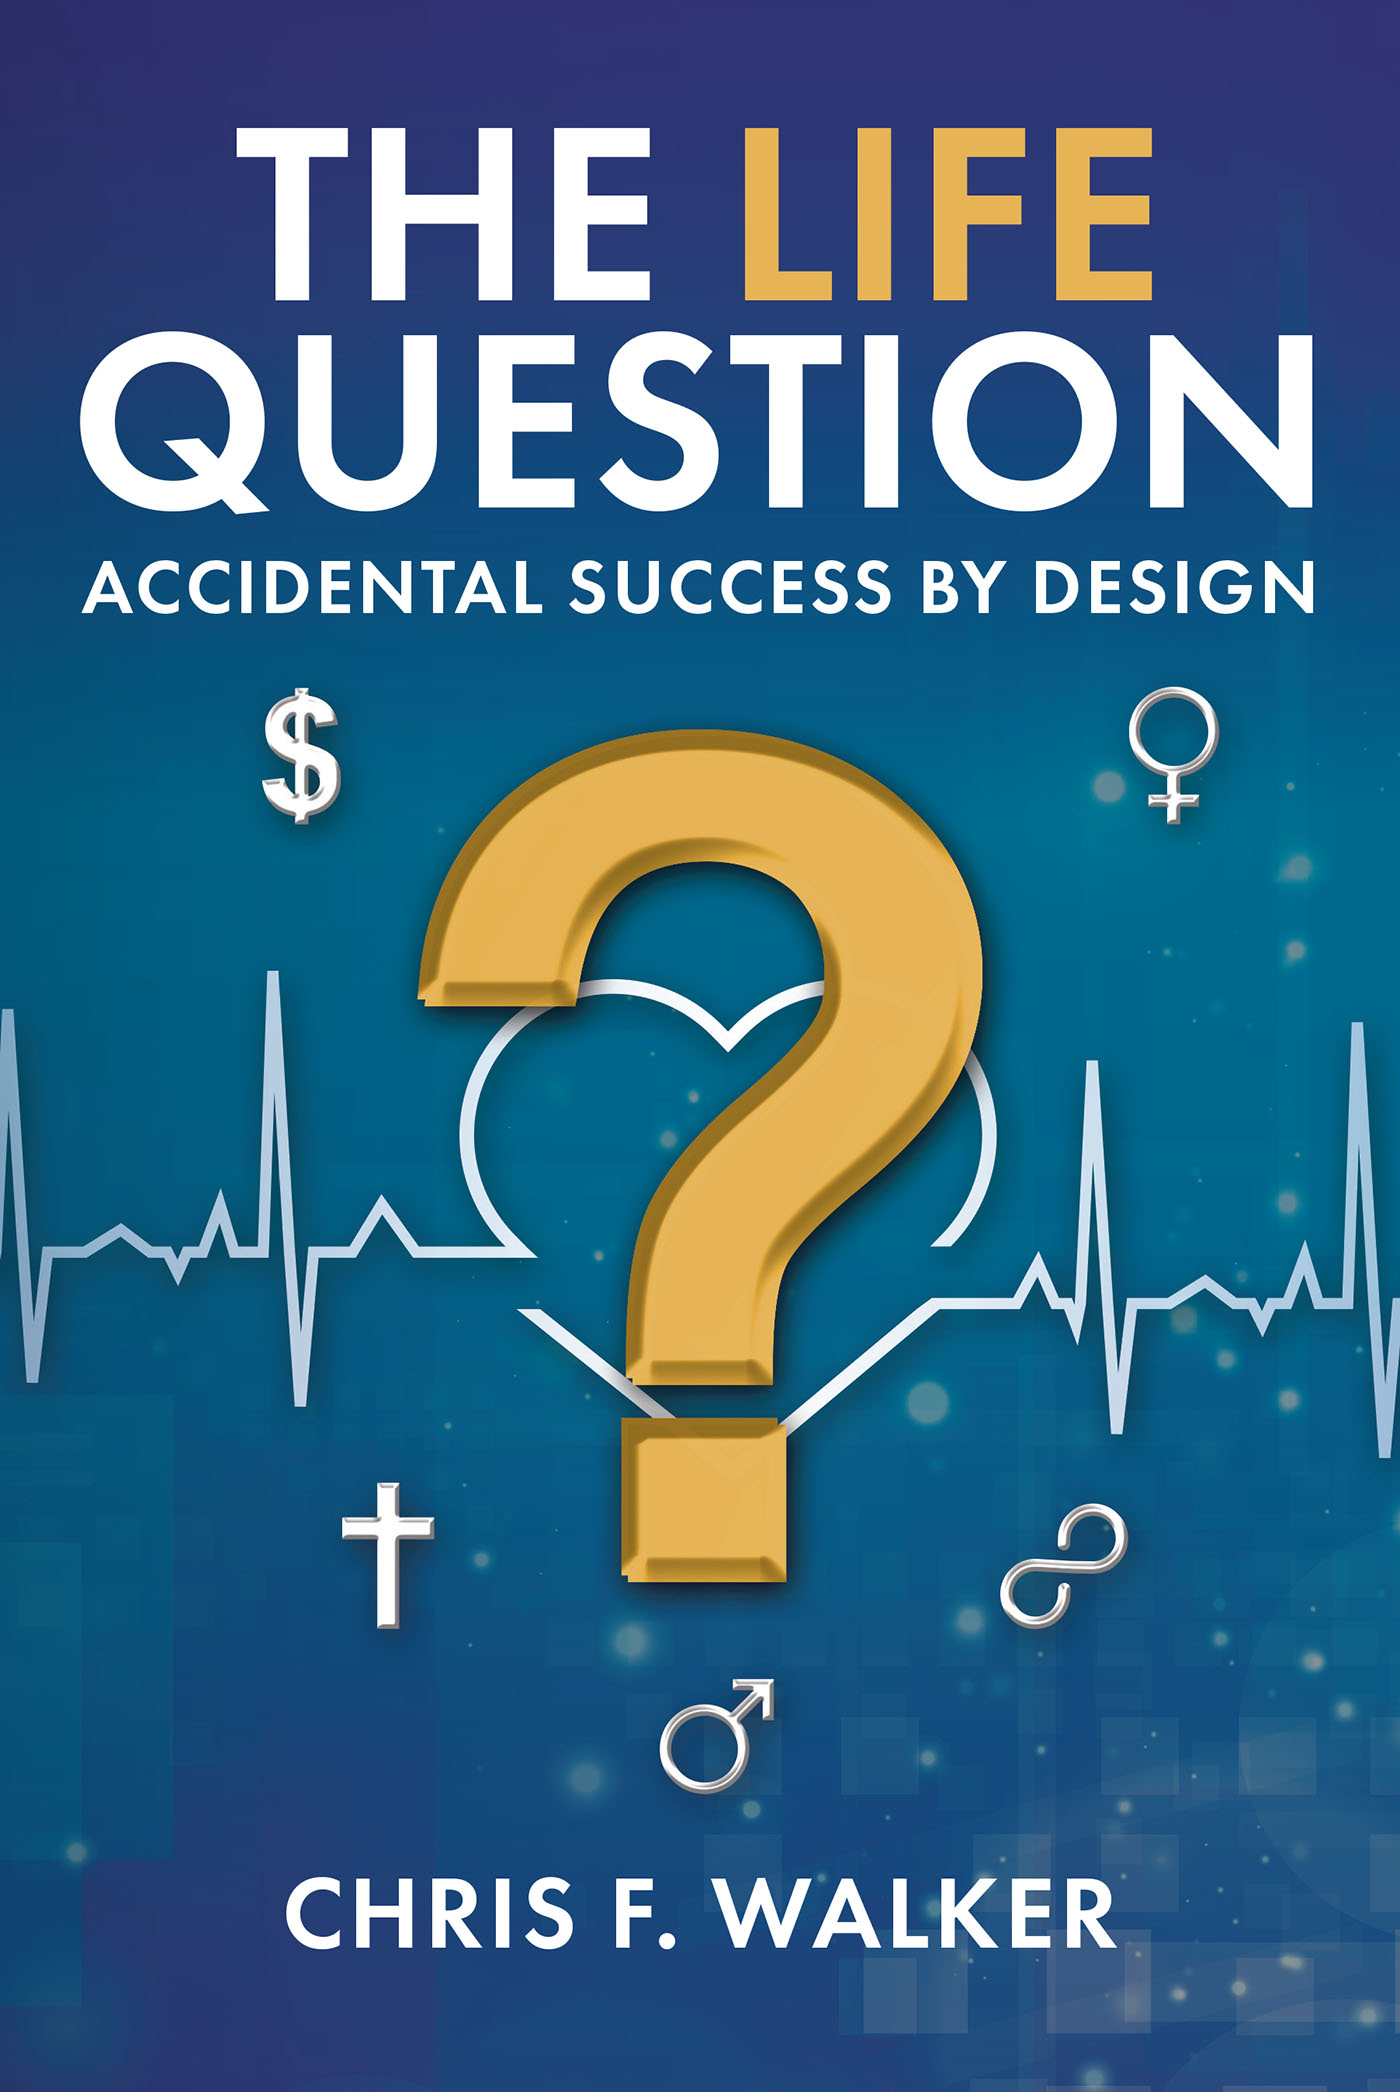 Chris F. Walker’s Newly Released “The LIFE Question: Accidental Success By Design” is an Empowering Resource for Personal Success